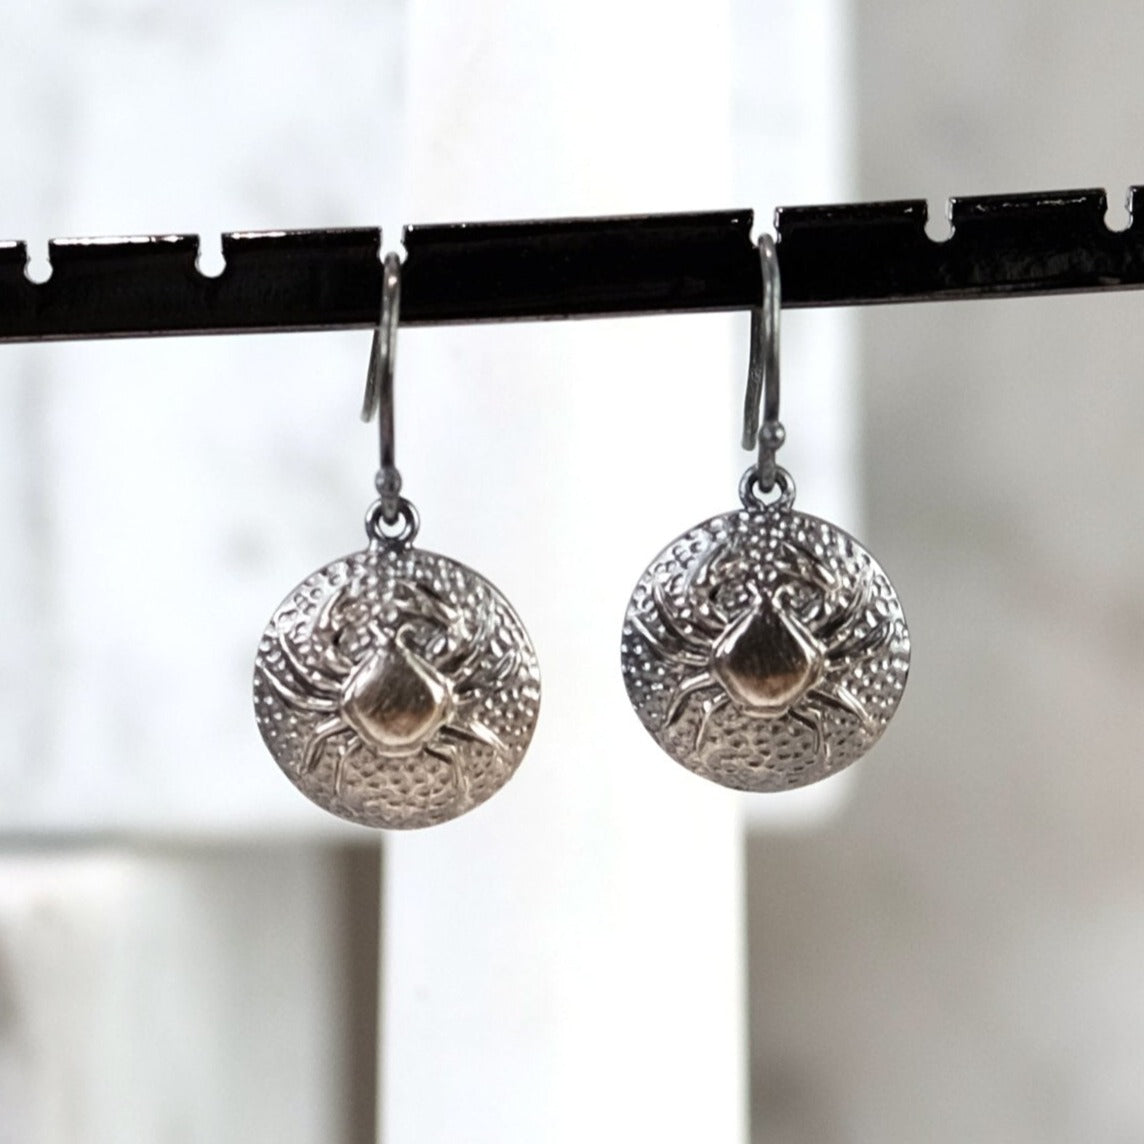 The Madstone Cancer Earrings